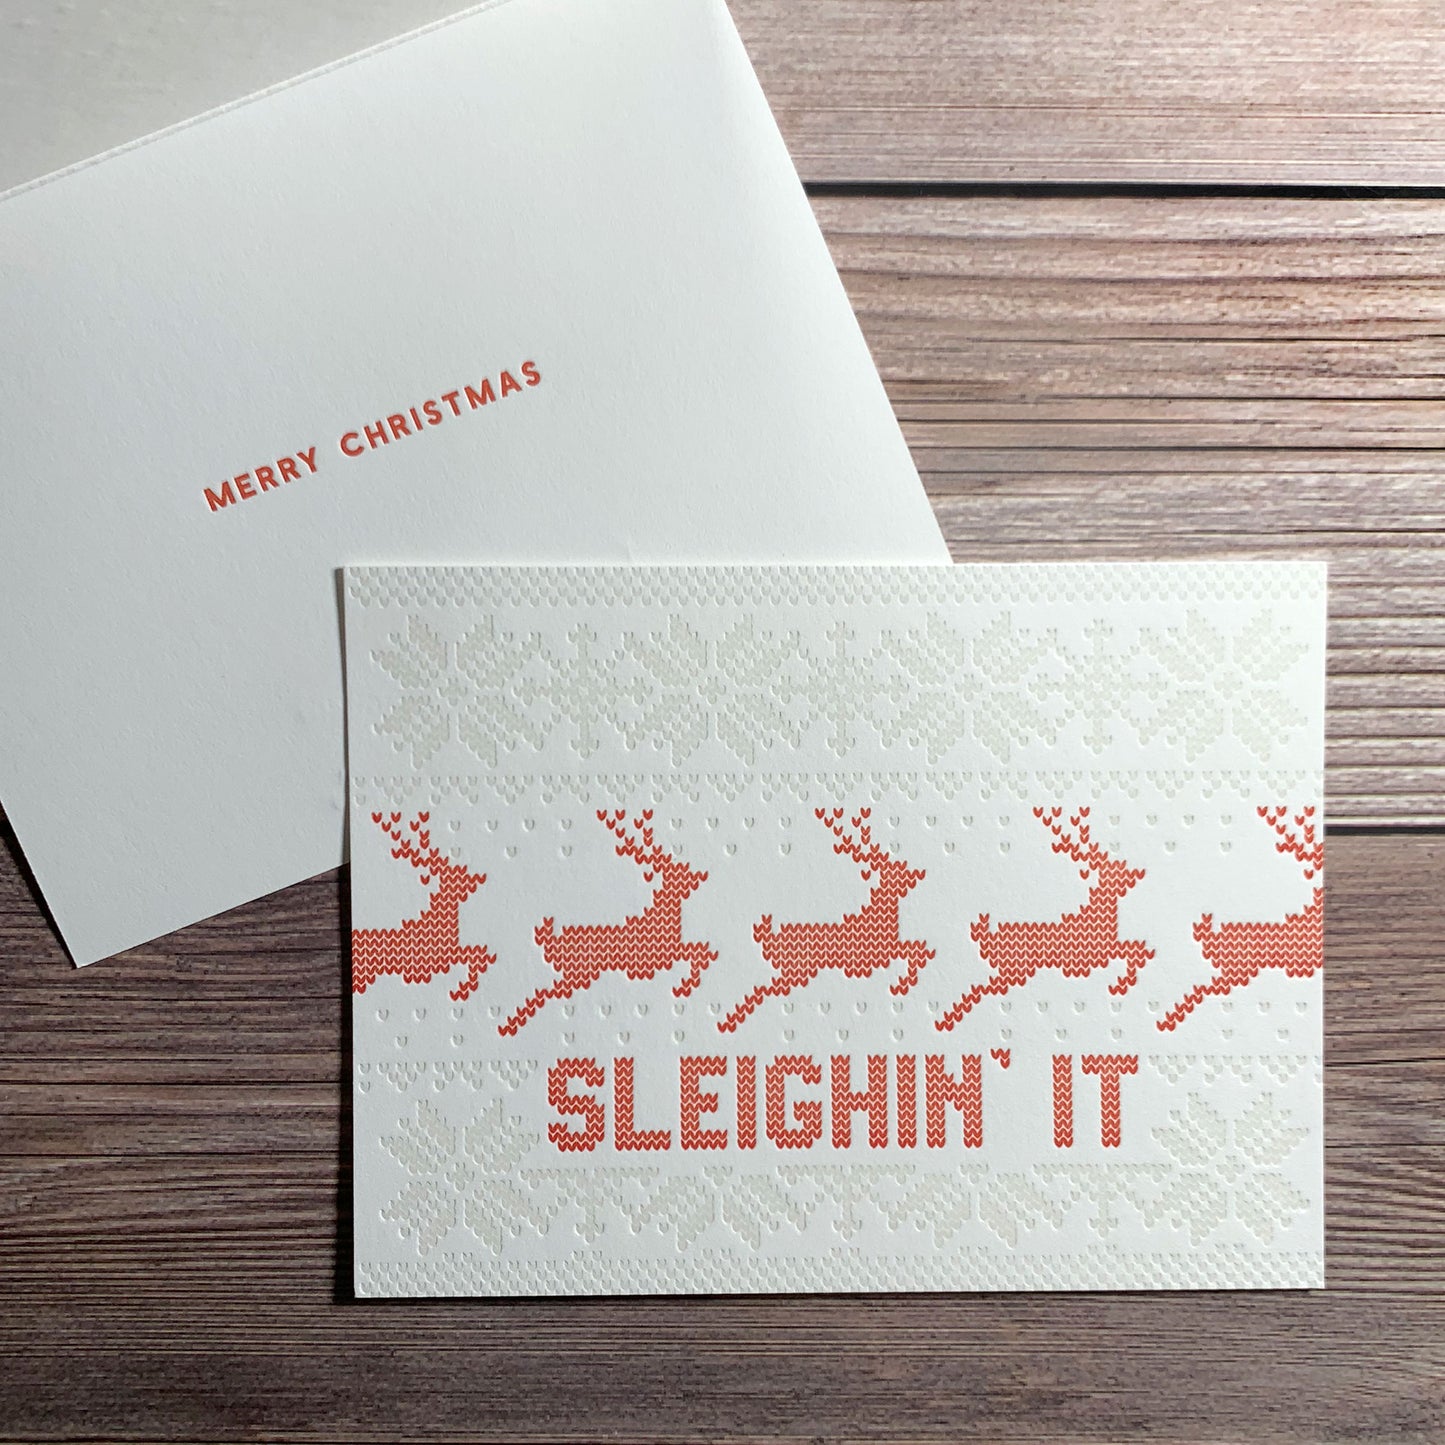 Sleighin' it, inside message: Merry Christmas, Ugly Sweater Christmas Card, Letterpress printed, includes envelope